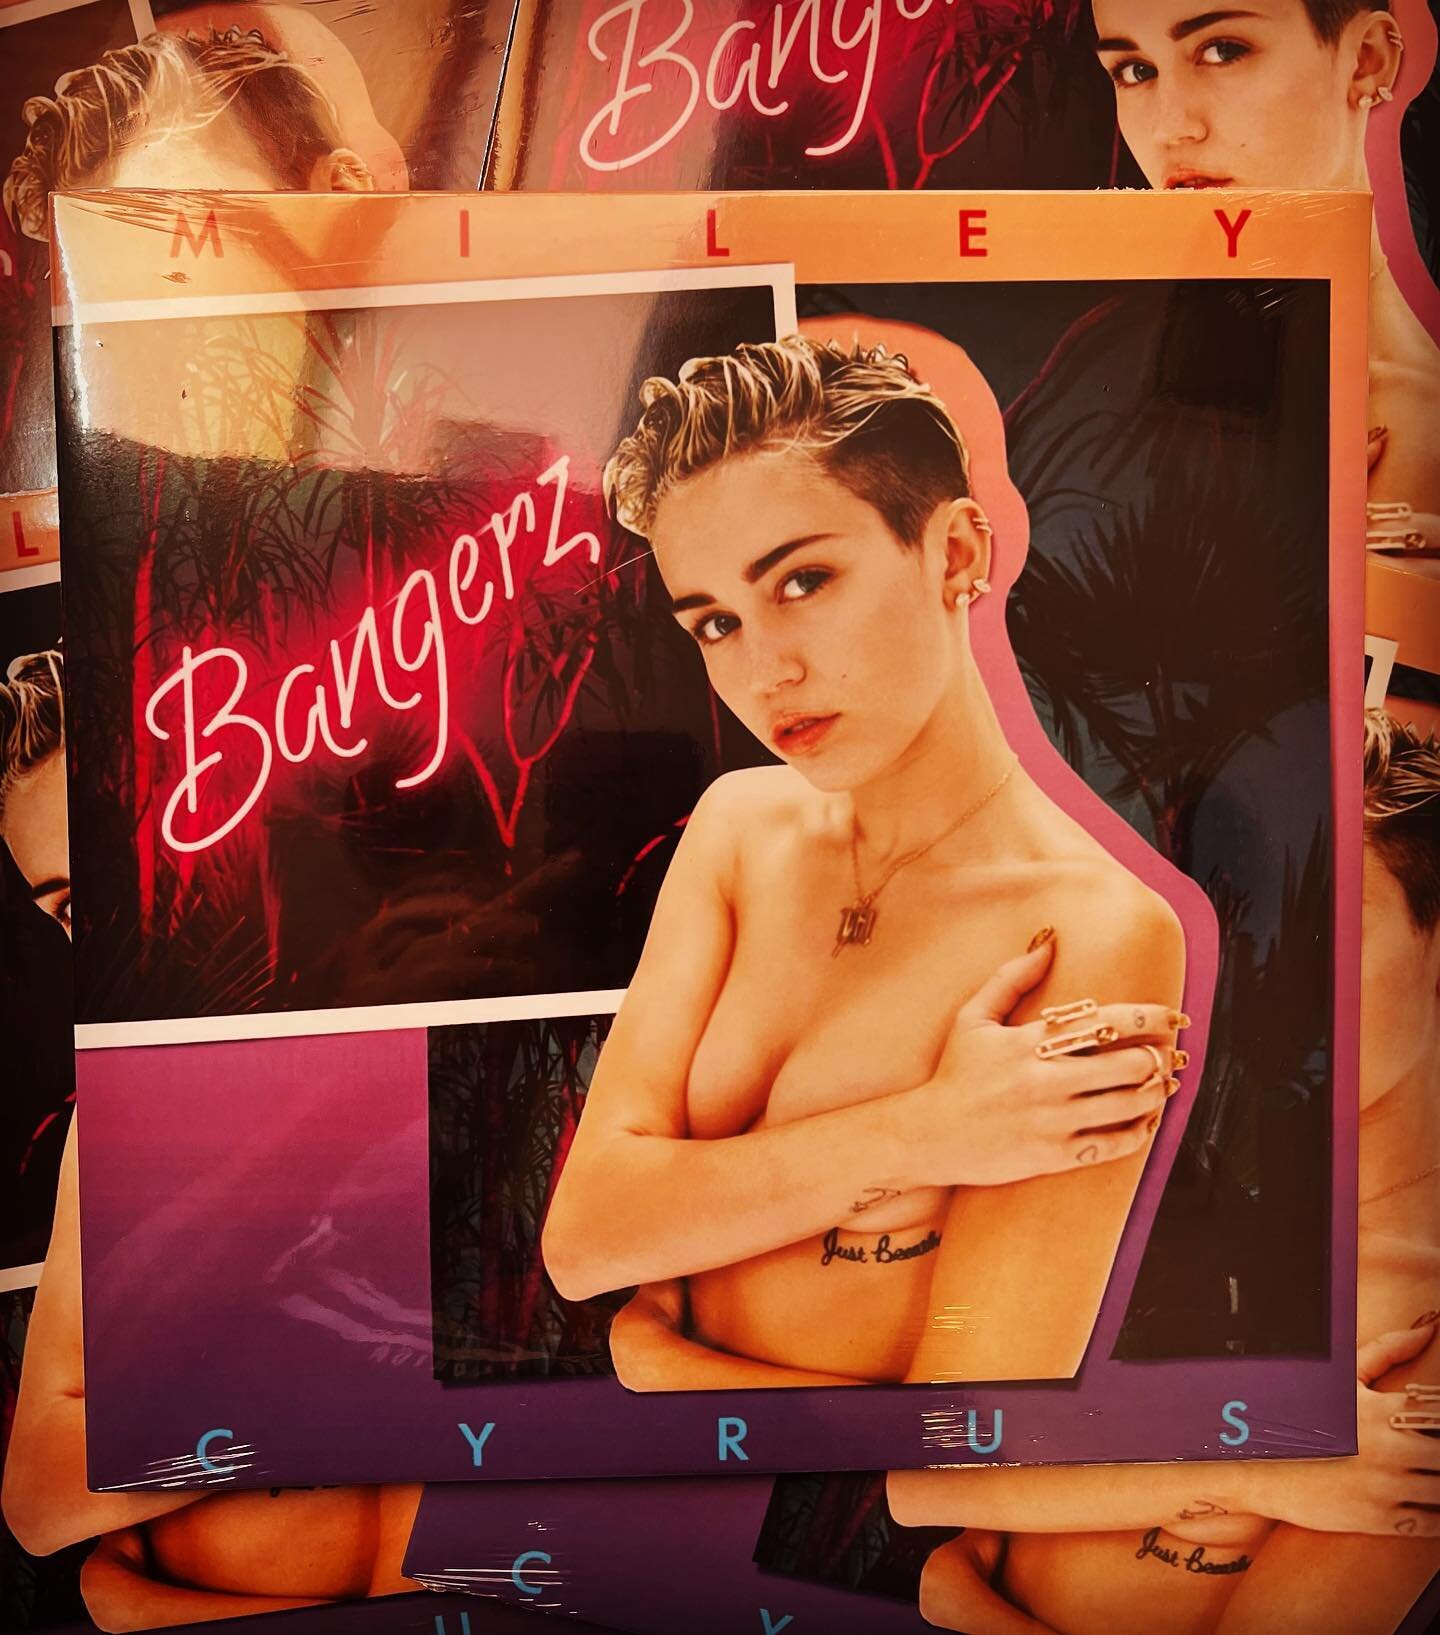 In stock now!  2xLP on pink vinyl.  Don&rsquo;t sleep on this one!  #mileycryus #bangerz #coloredvinyl #miley #wreckingball #recordcollection #vinylrecords